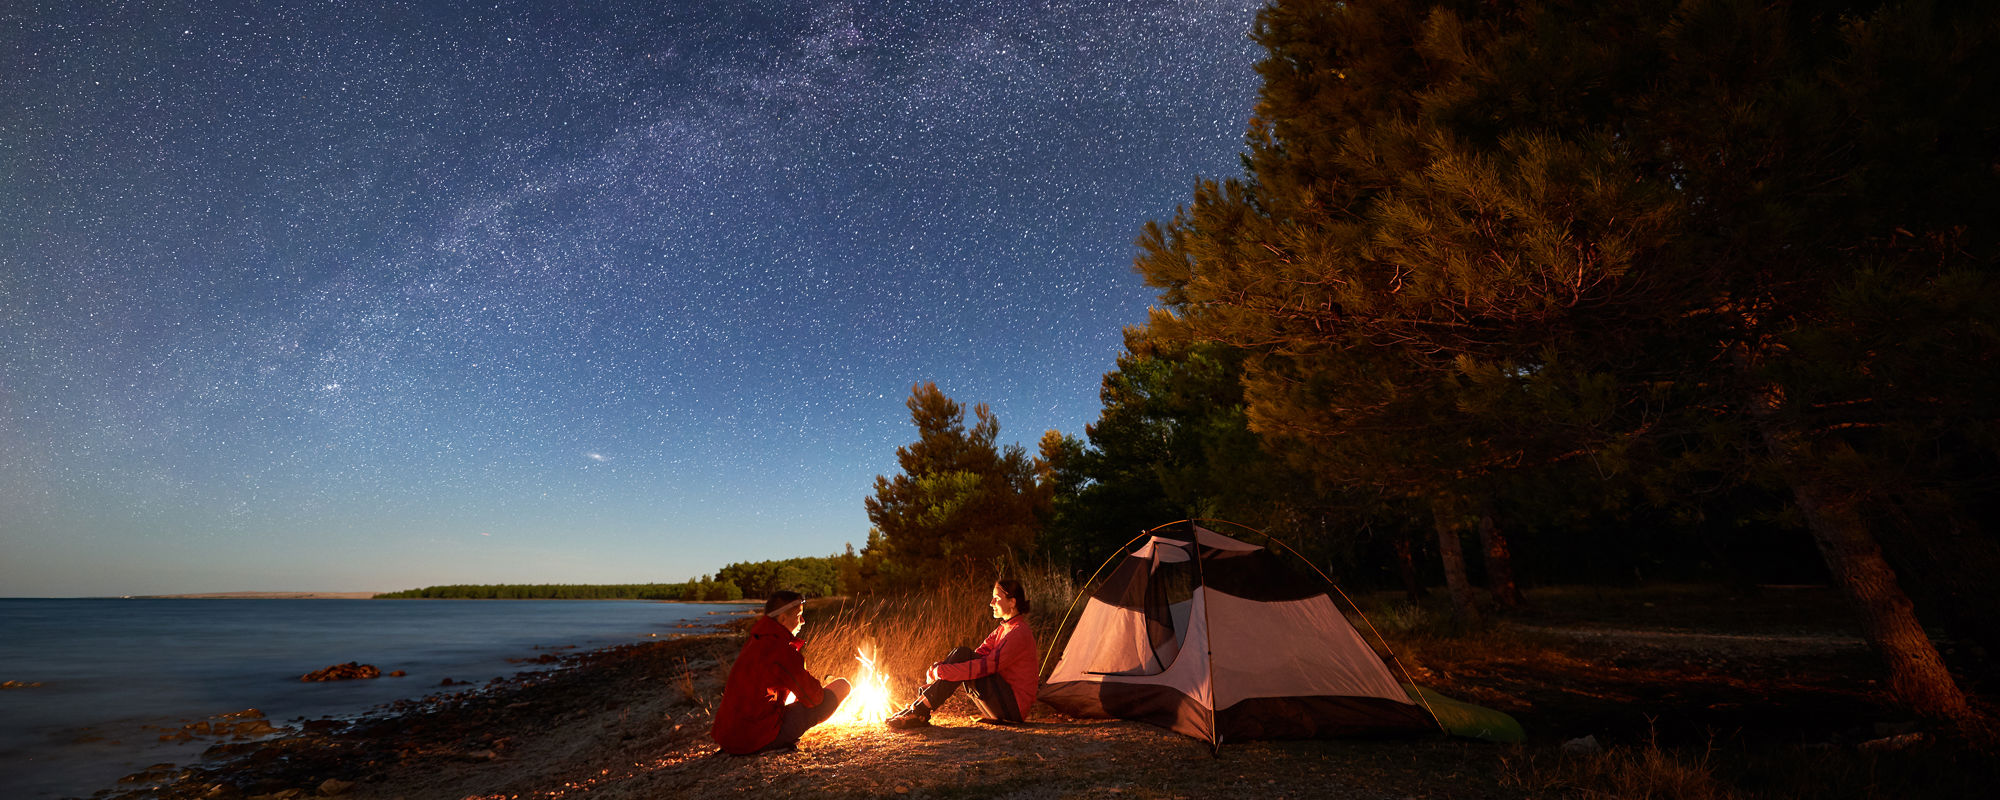 People camping under the stars